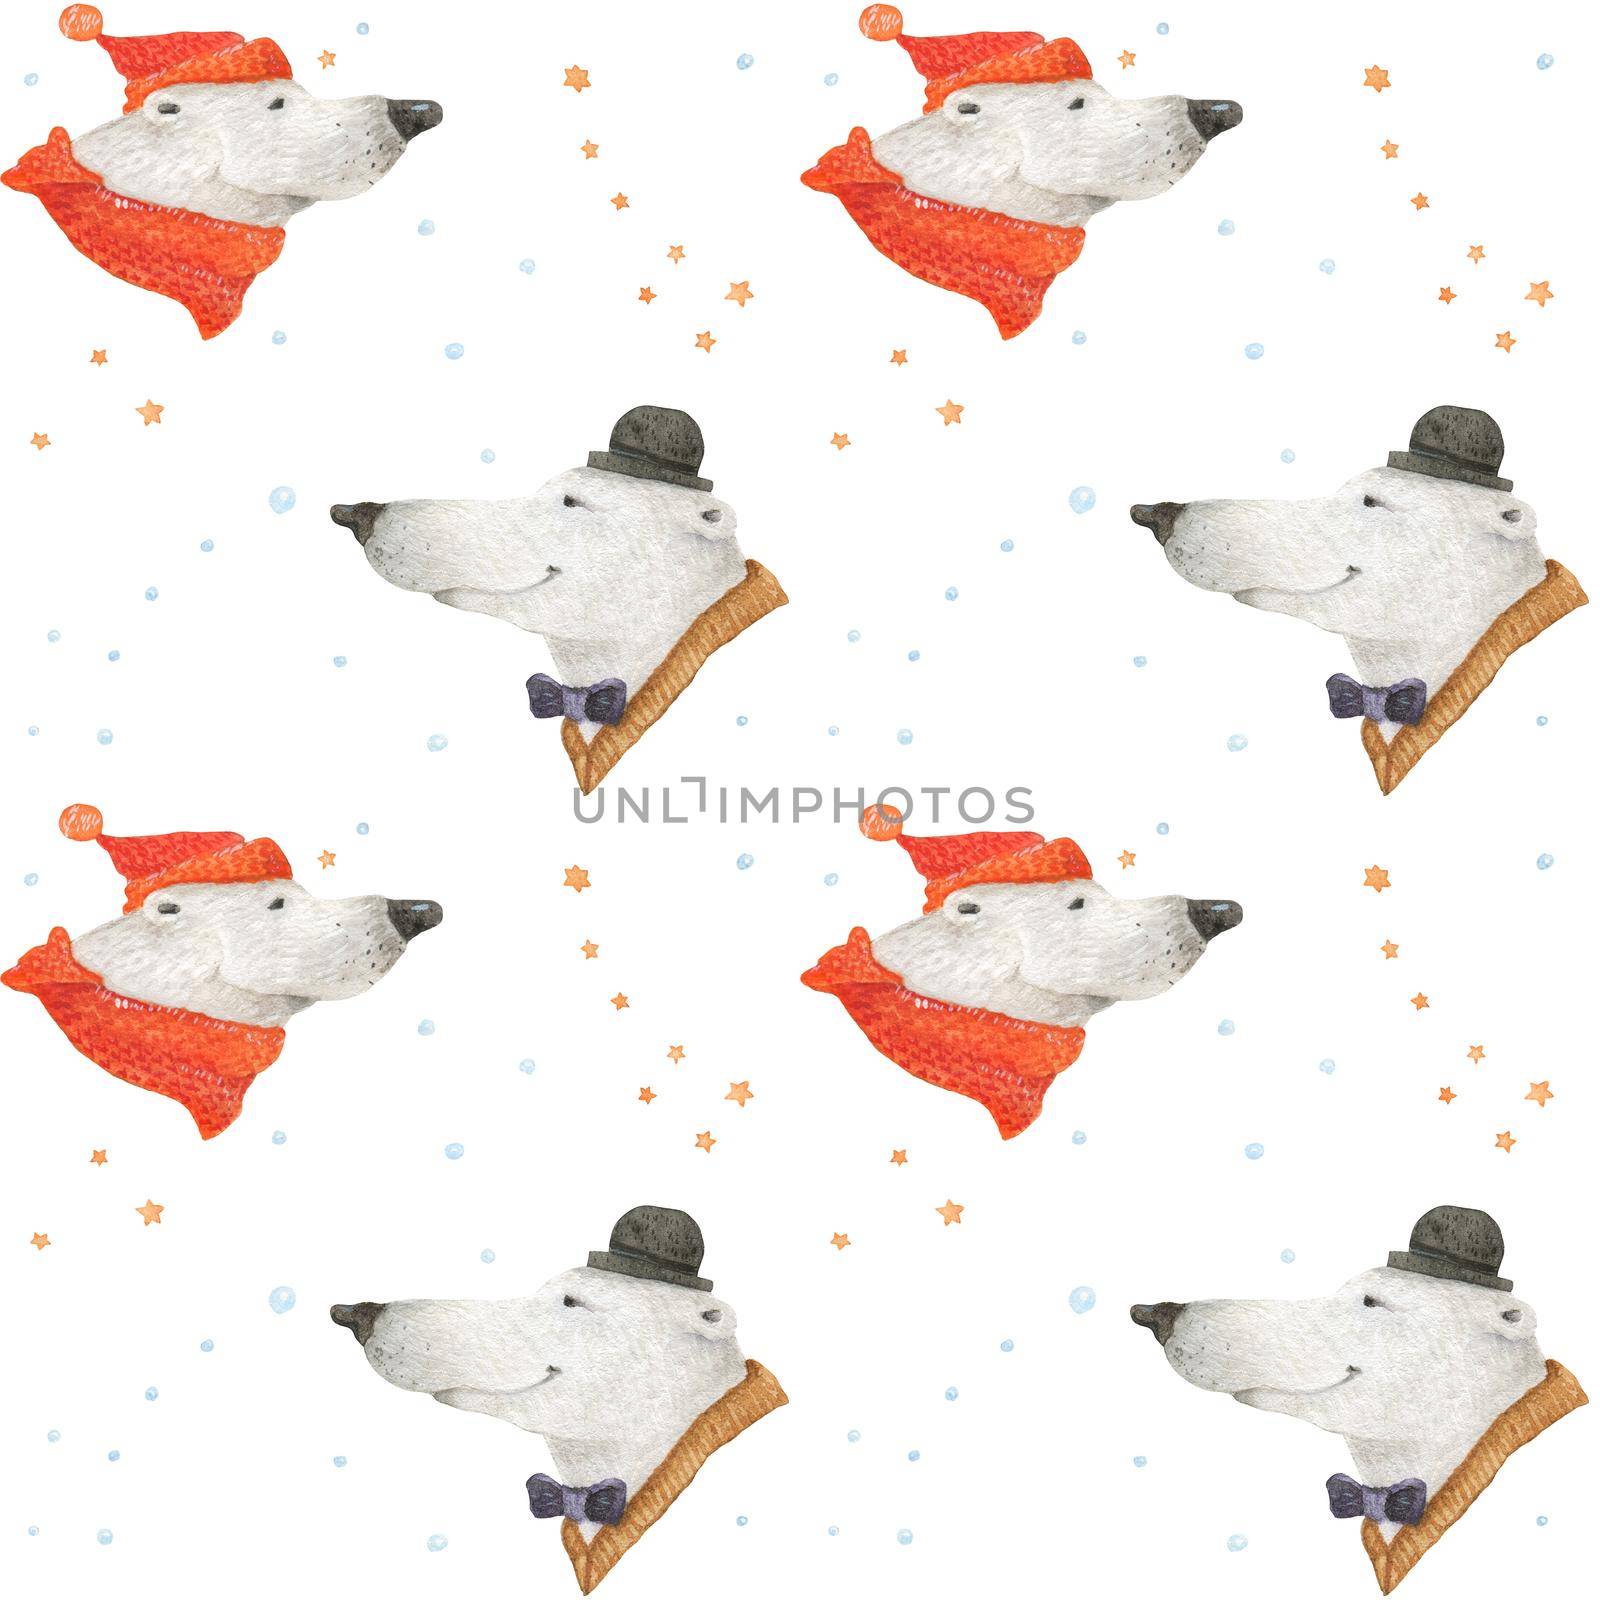 Polar bear winter fun. Arctic bear portrets. Watercolor seamless patterns for textile, wrapping paper and any tiled design. White background, clipping path uncluded